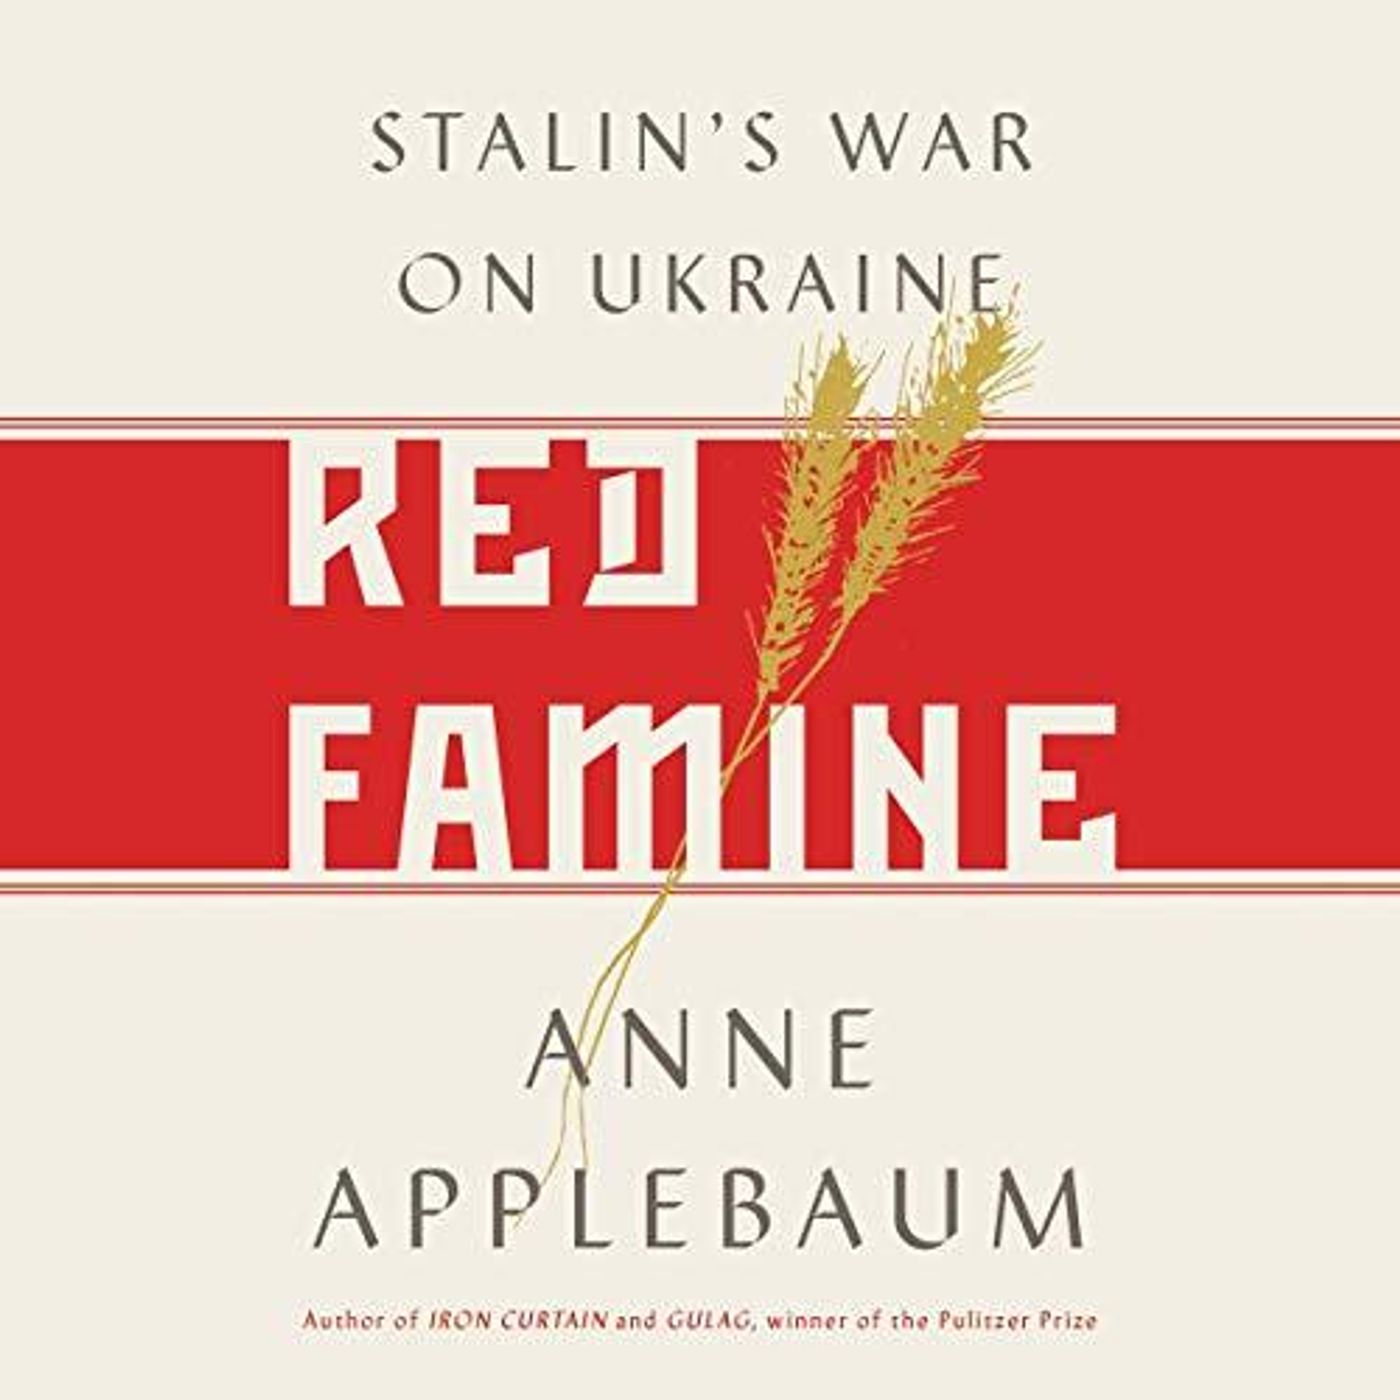 From The Archives: Anne Applebaum